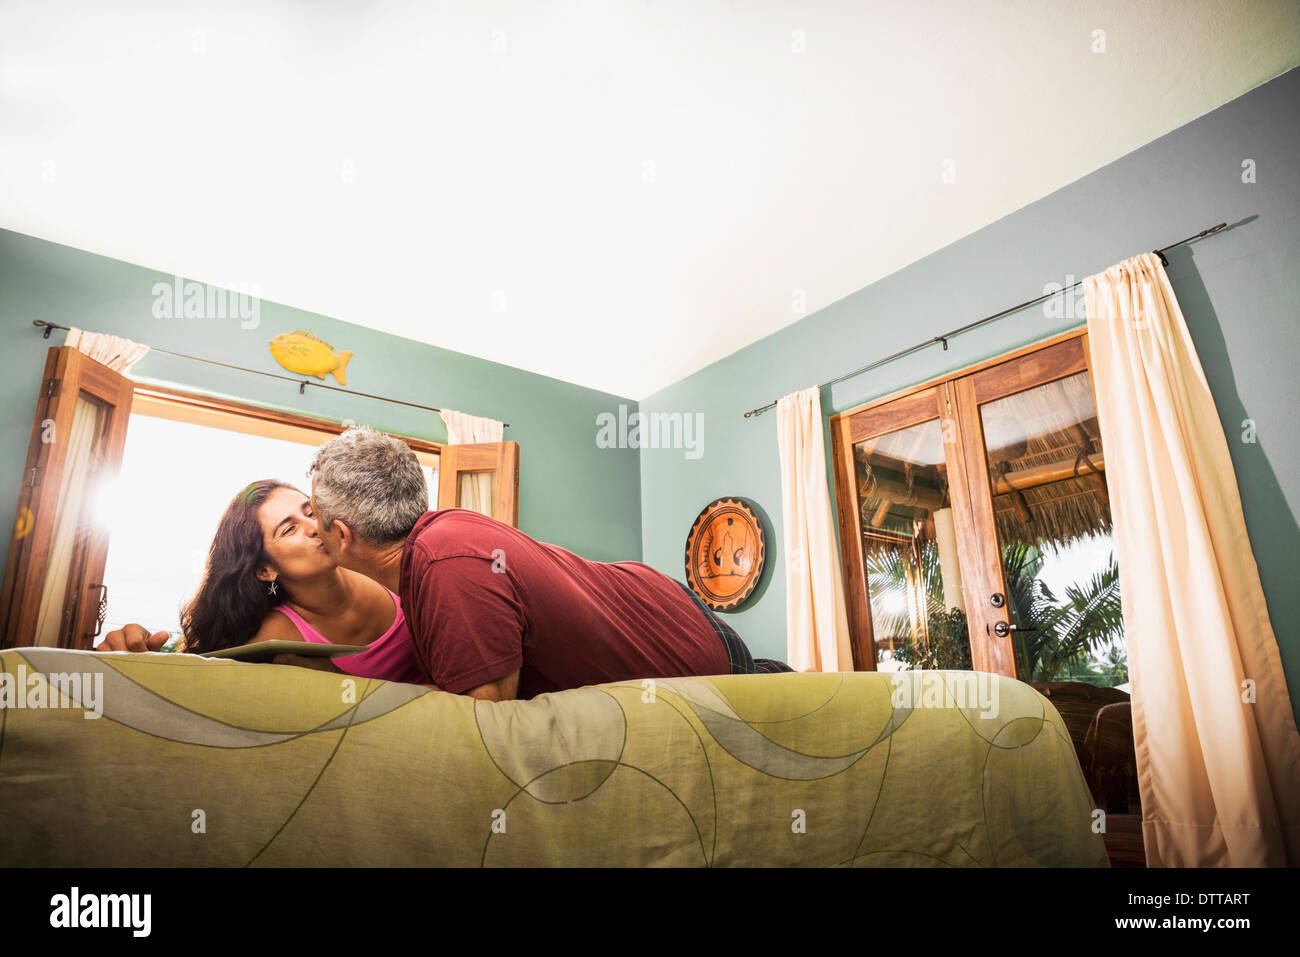 Couple kissing on bed Stock Photo